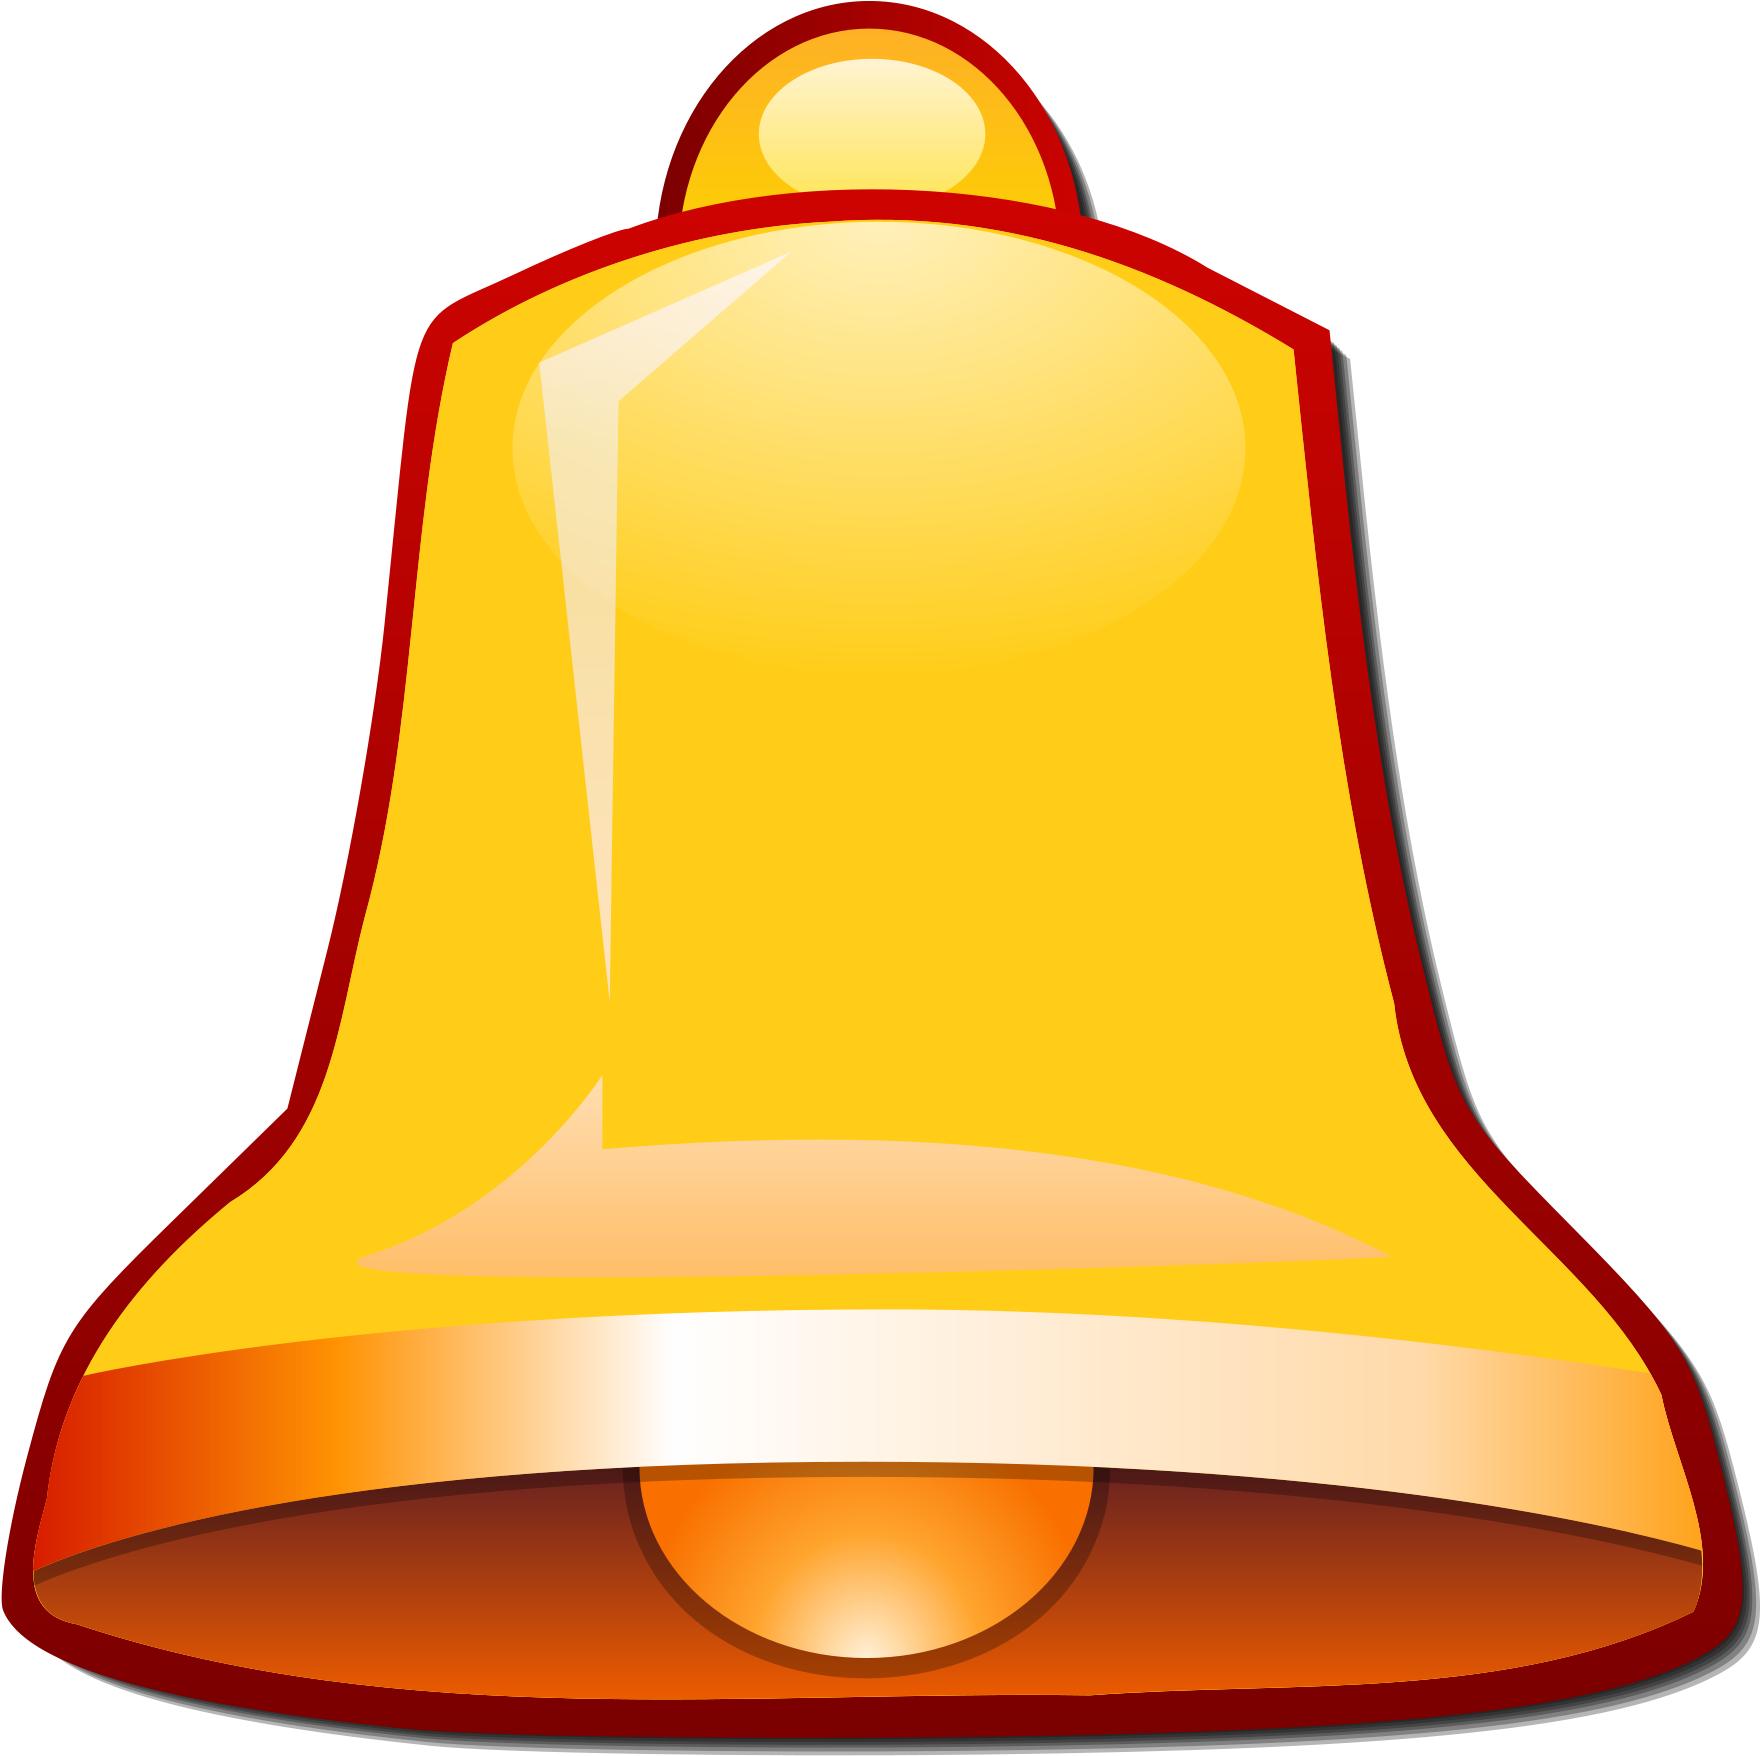 Golden Youtube Bell Icon Transparent Image